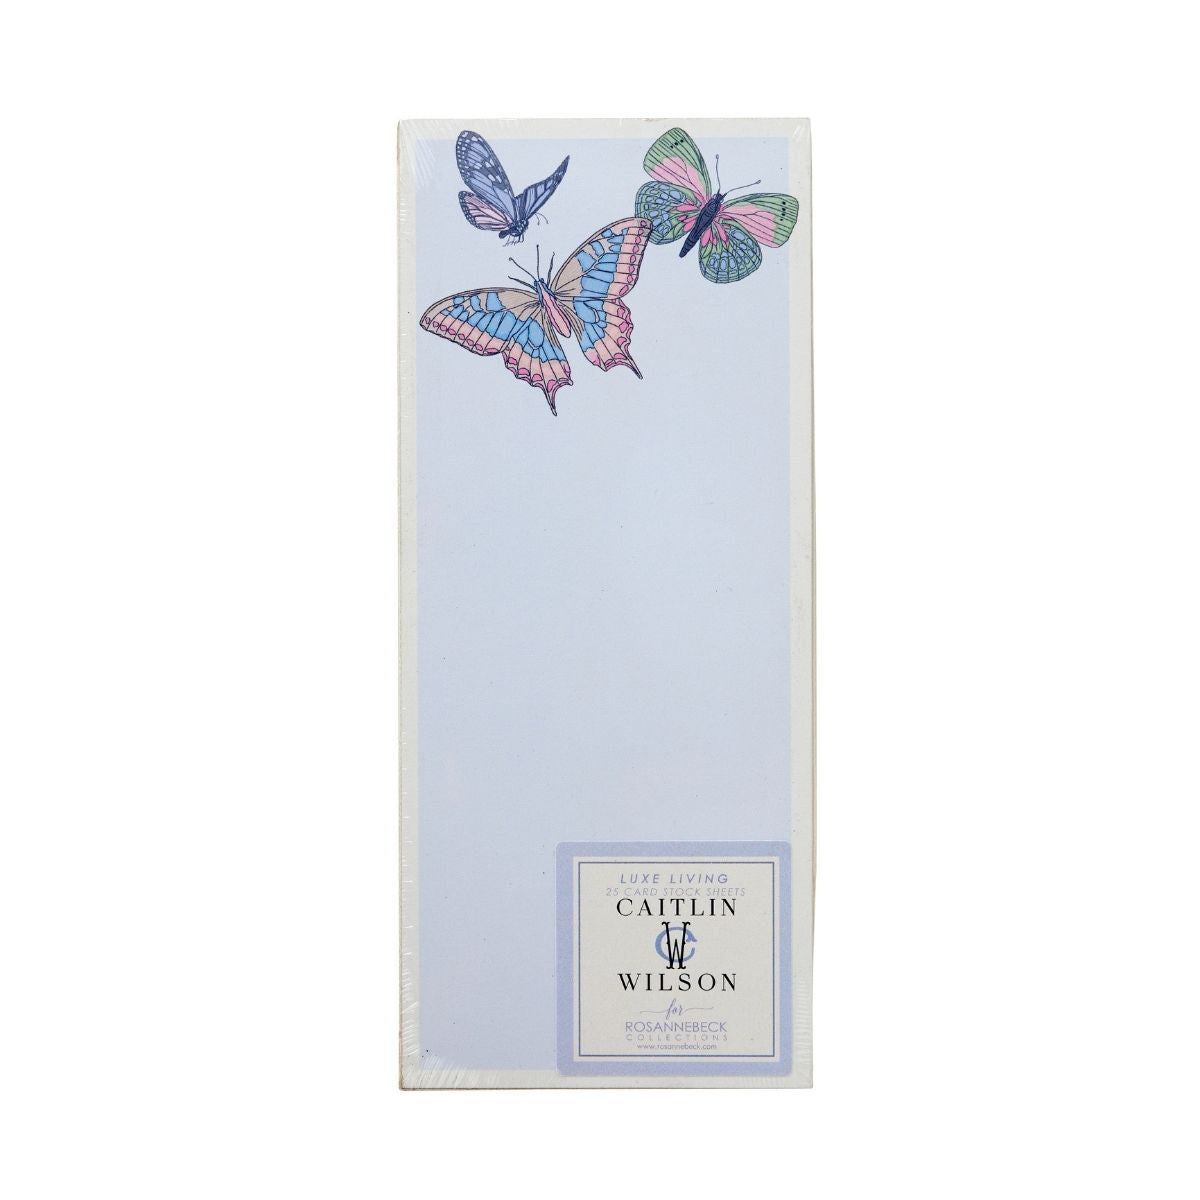 Pastel Papillon Luxe Skinny Notepad